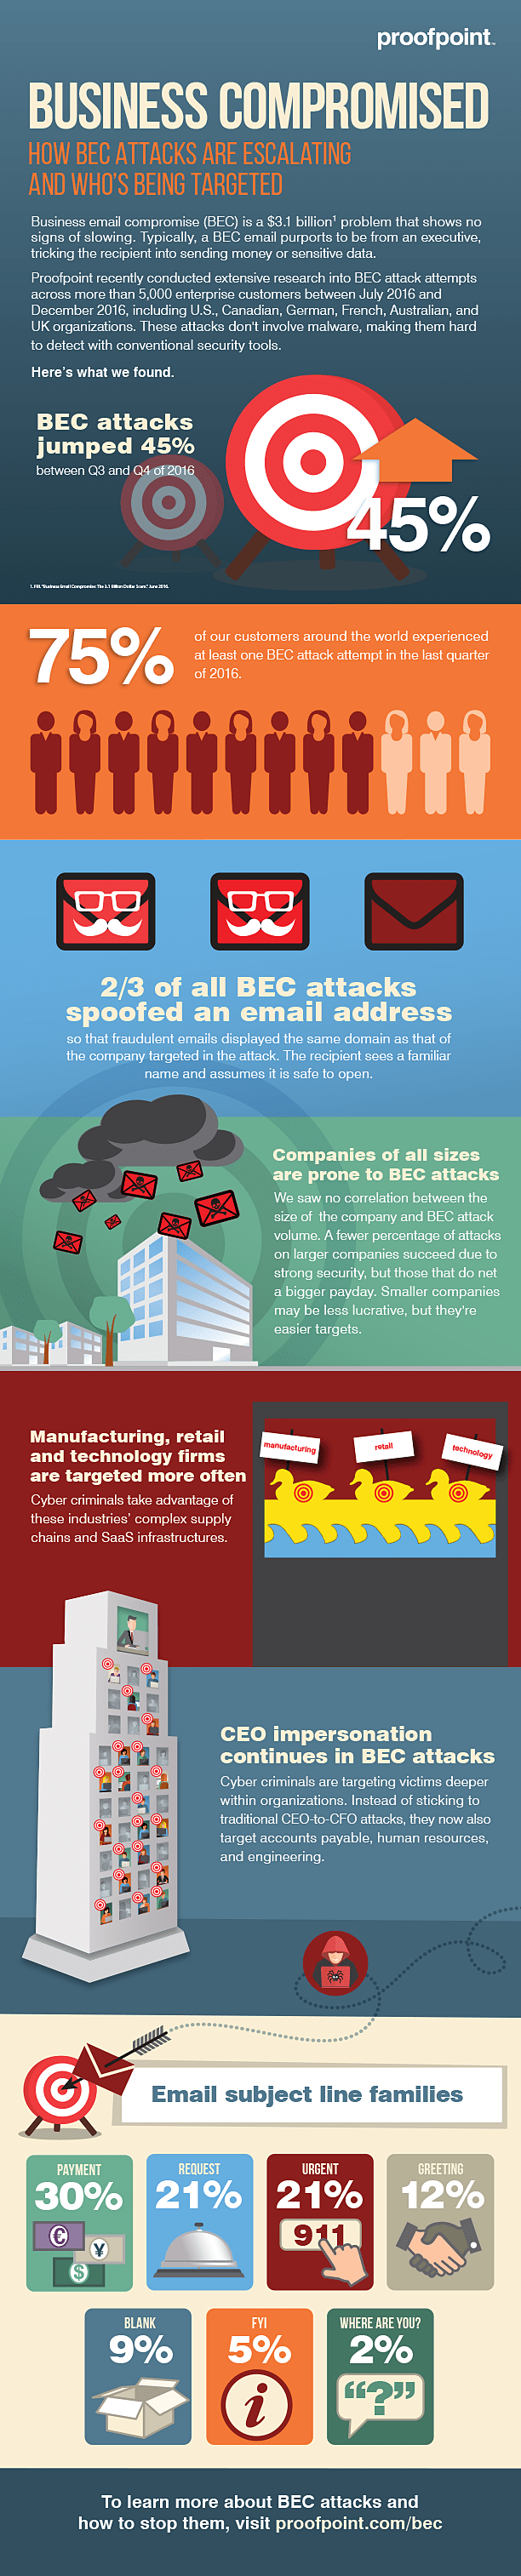 Proofpoint Business Compromised infographic